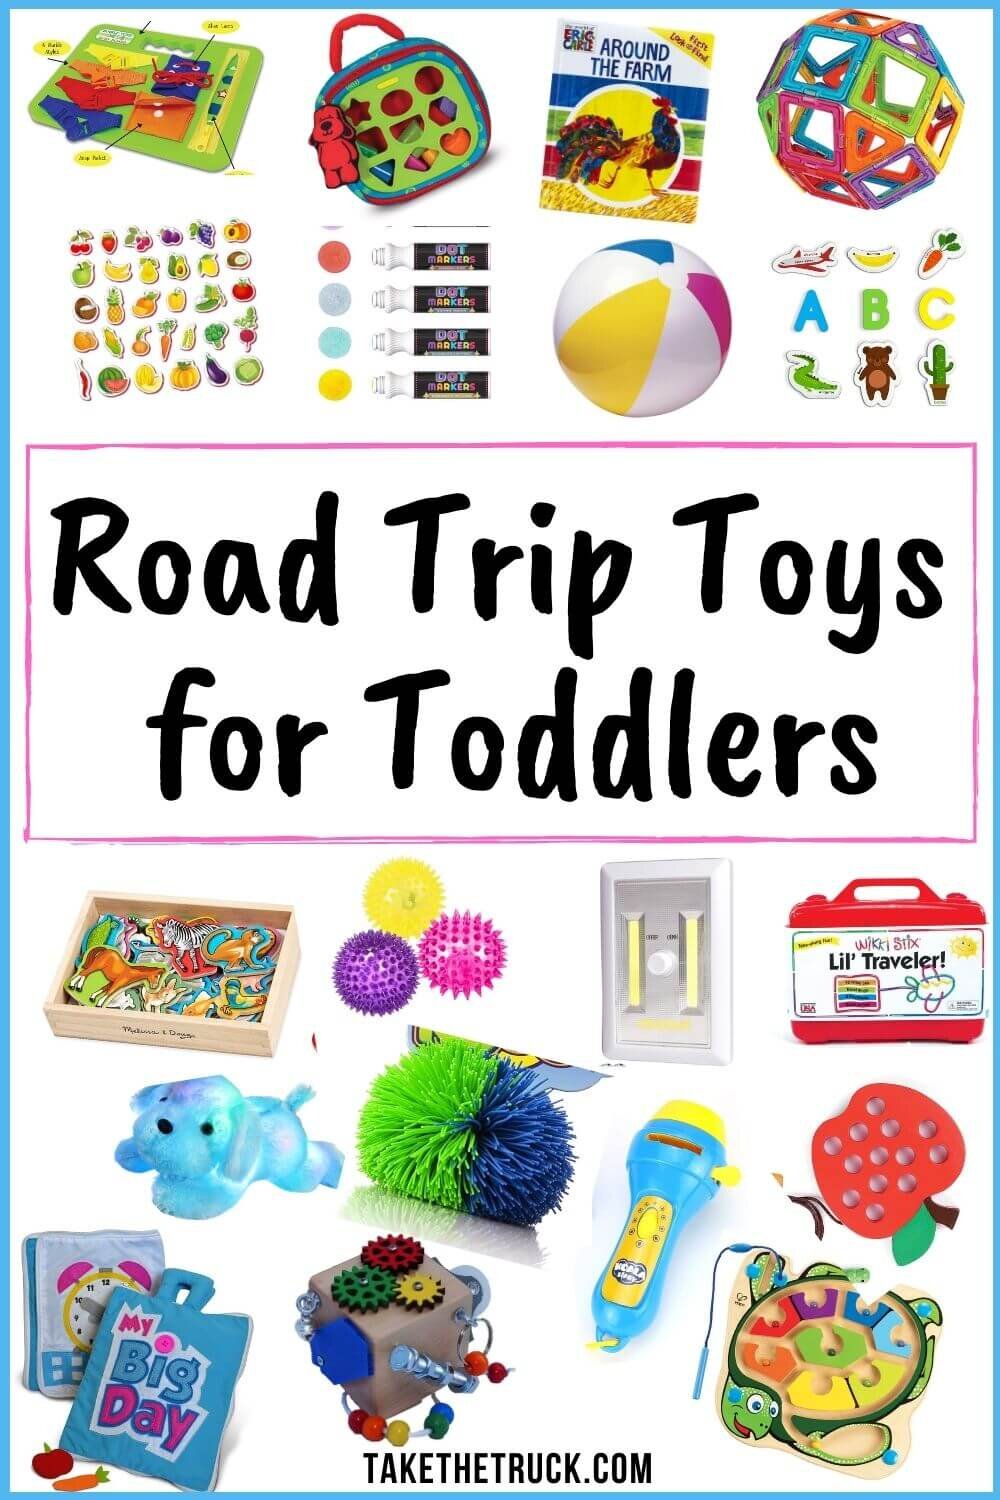 10 Awesome Travel Activities for Older Kids  Road trip activities, Travel  activities, Road trip with kids